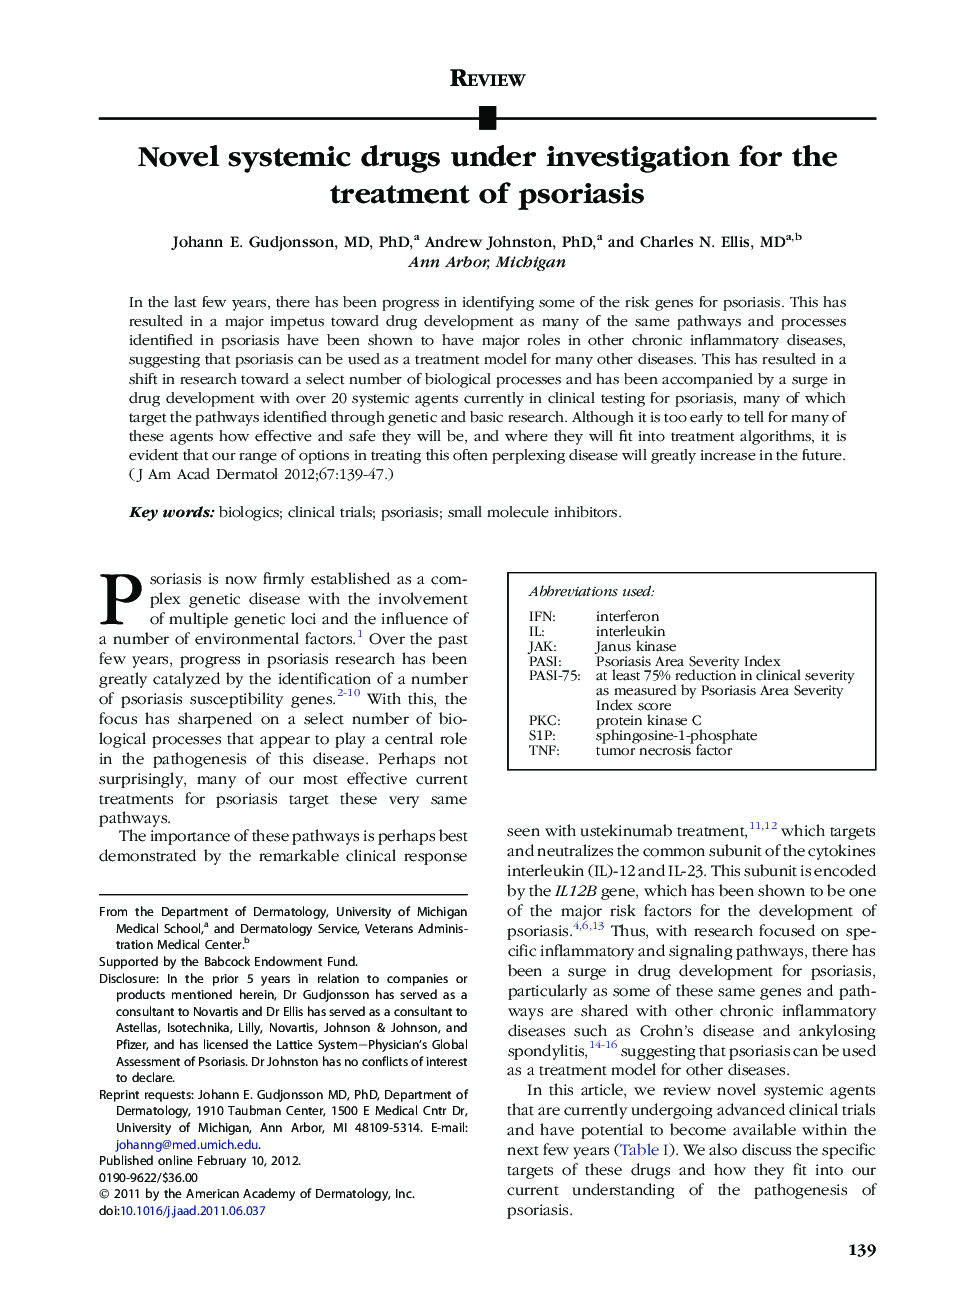 Novel systemic drugs under investigation for the treatment of psoriasis 